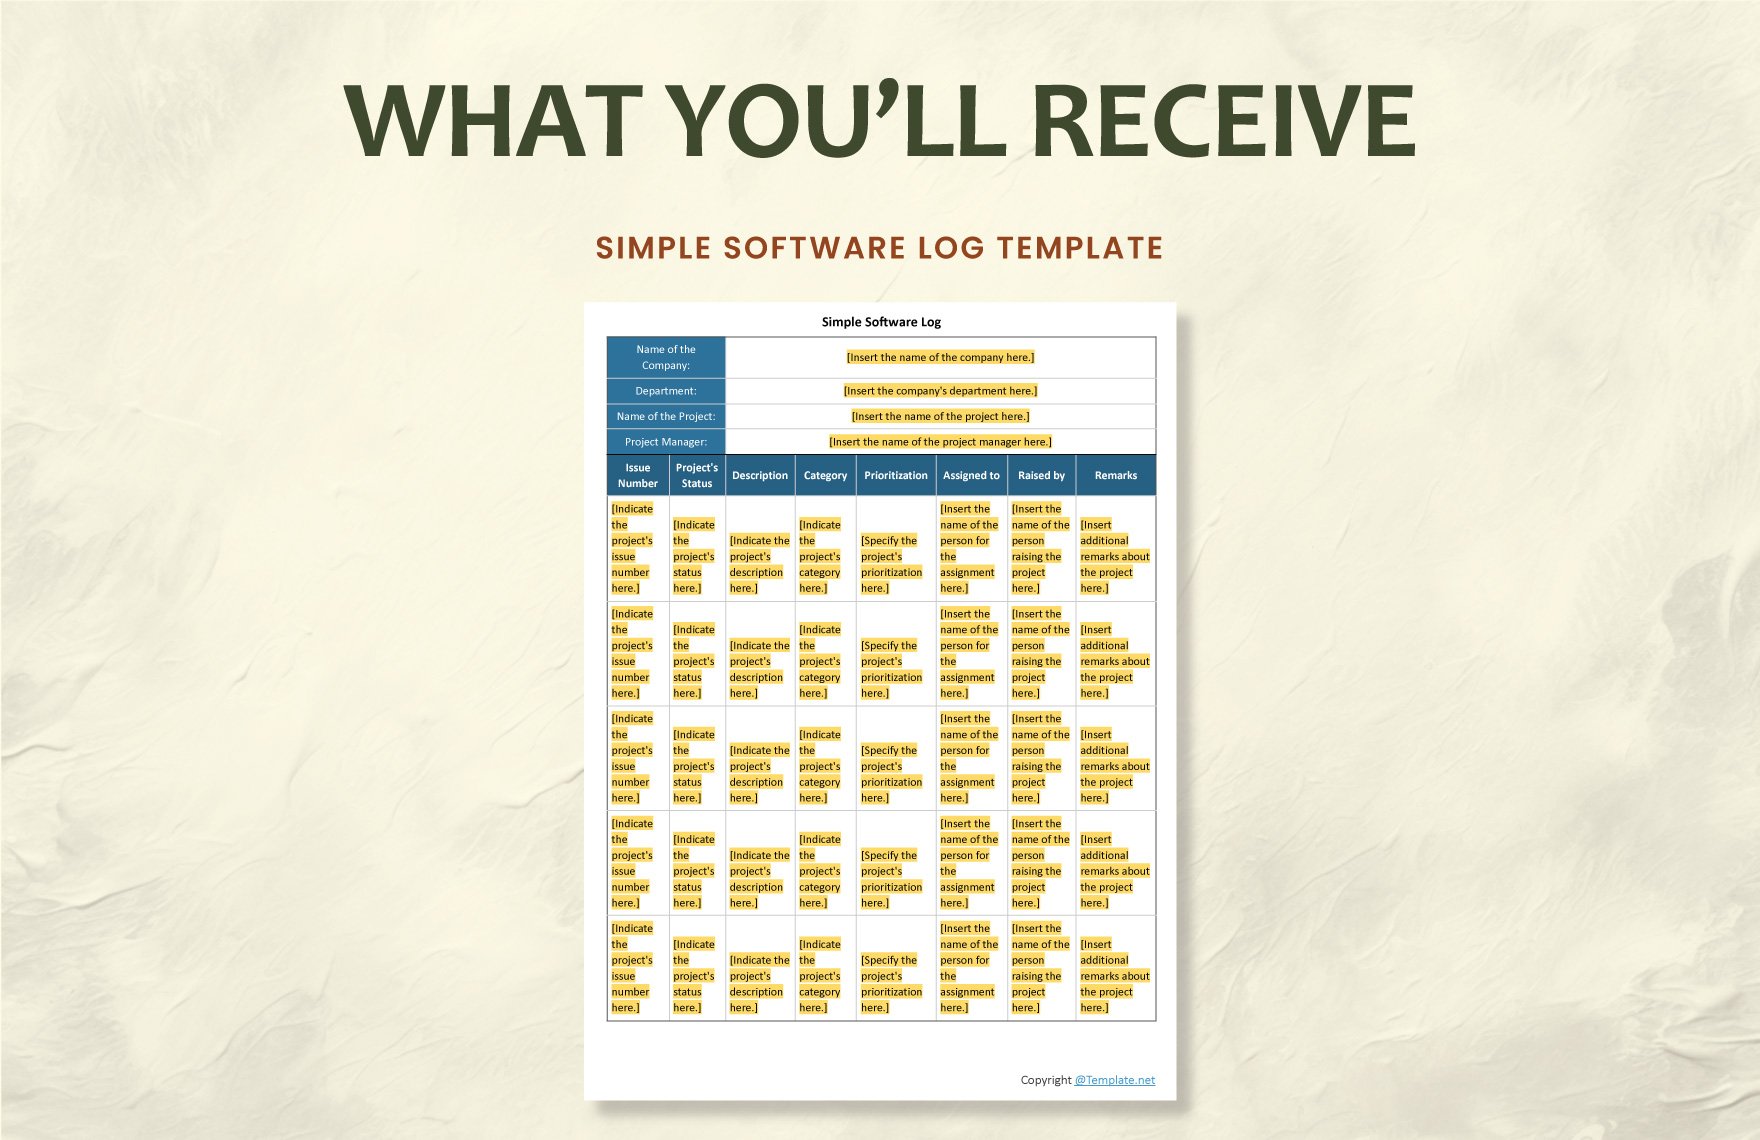 Simple Software Log Template